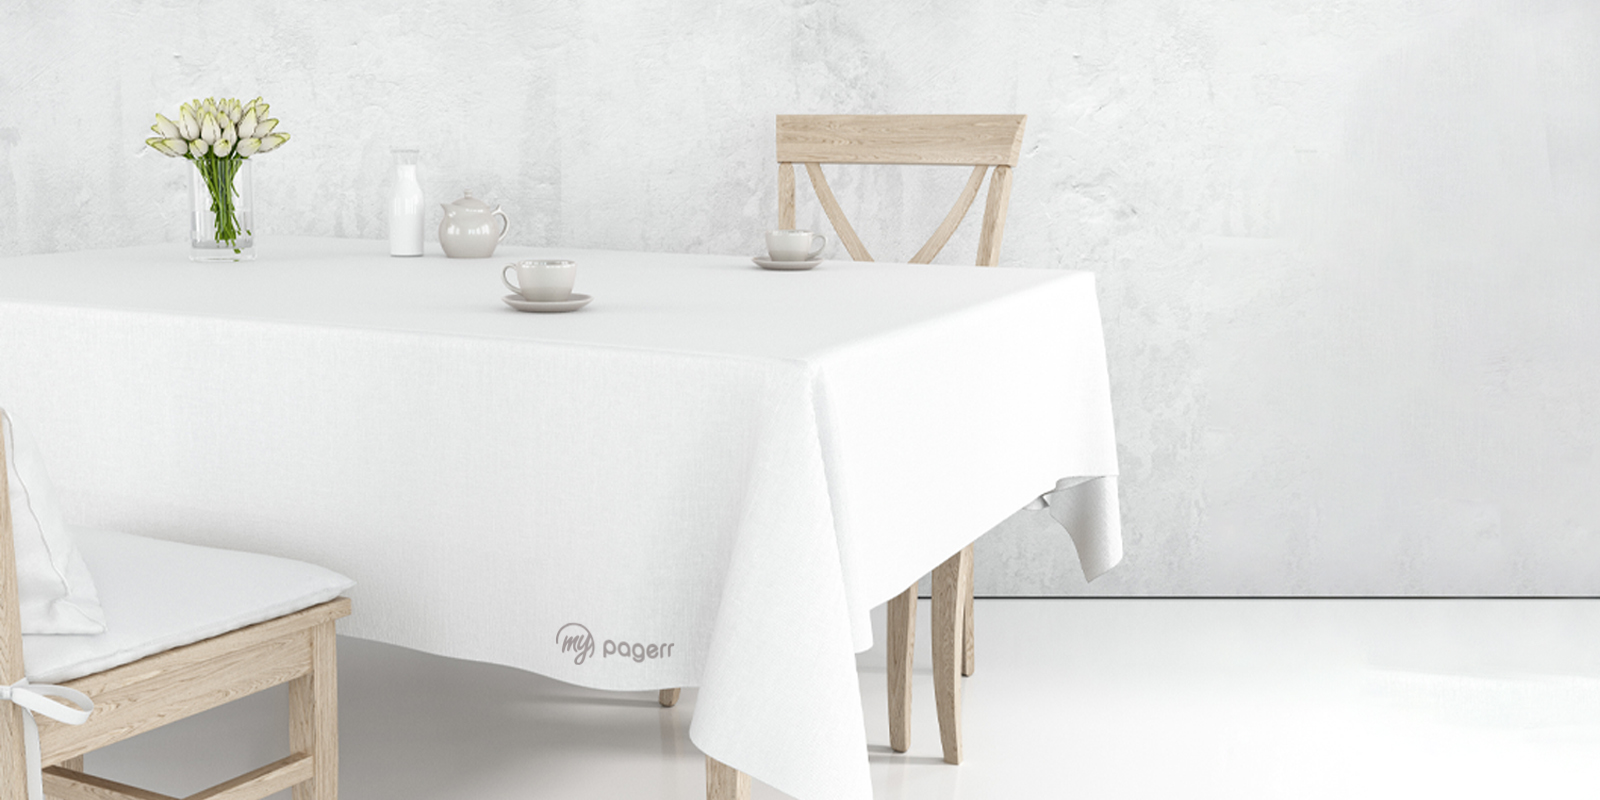 Tablecloths in Hamburg - Print with Pagerr